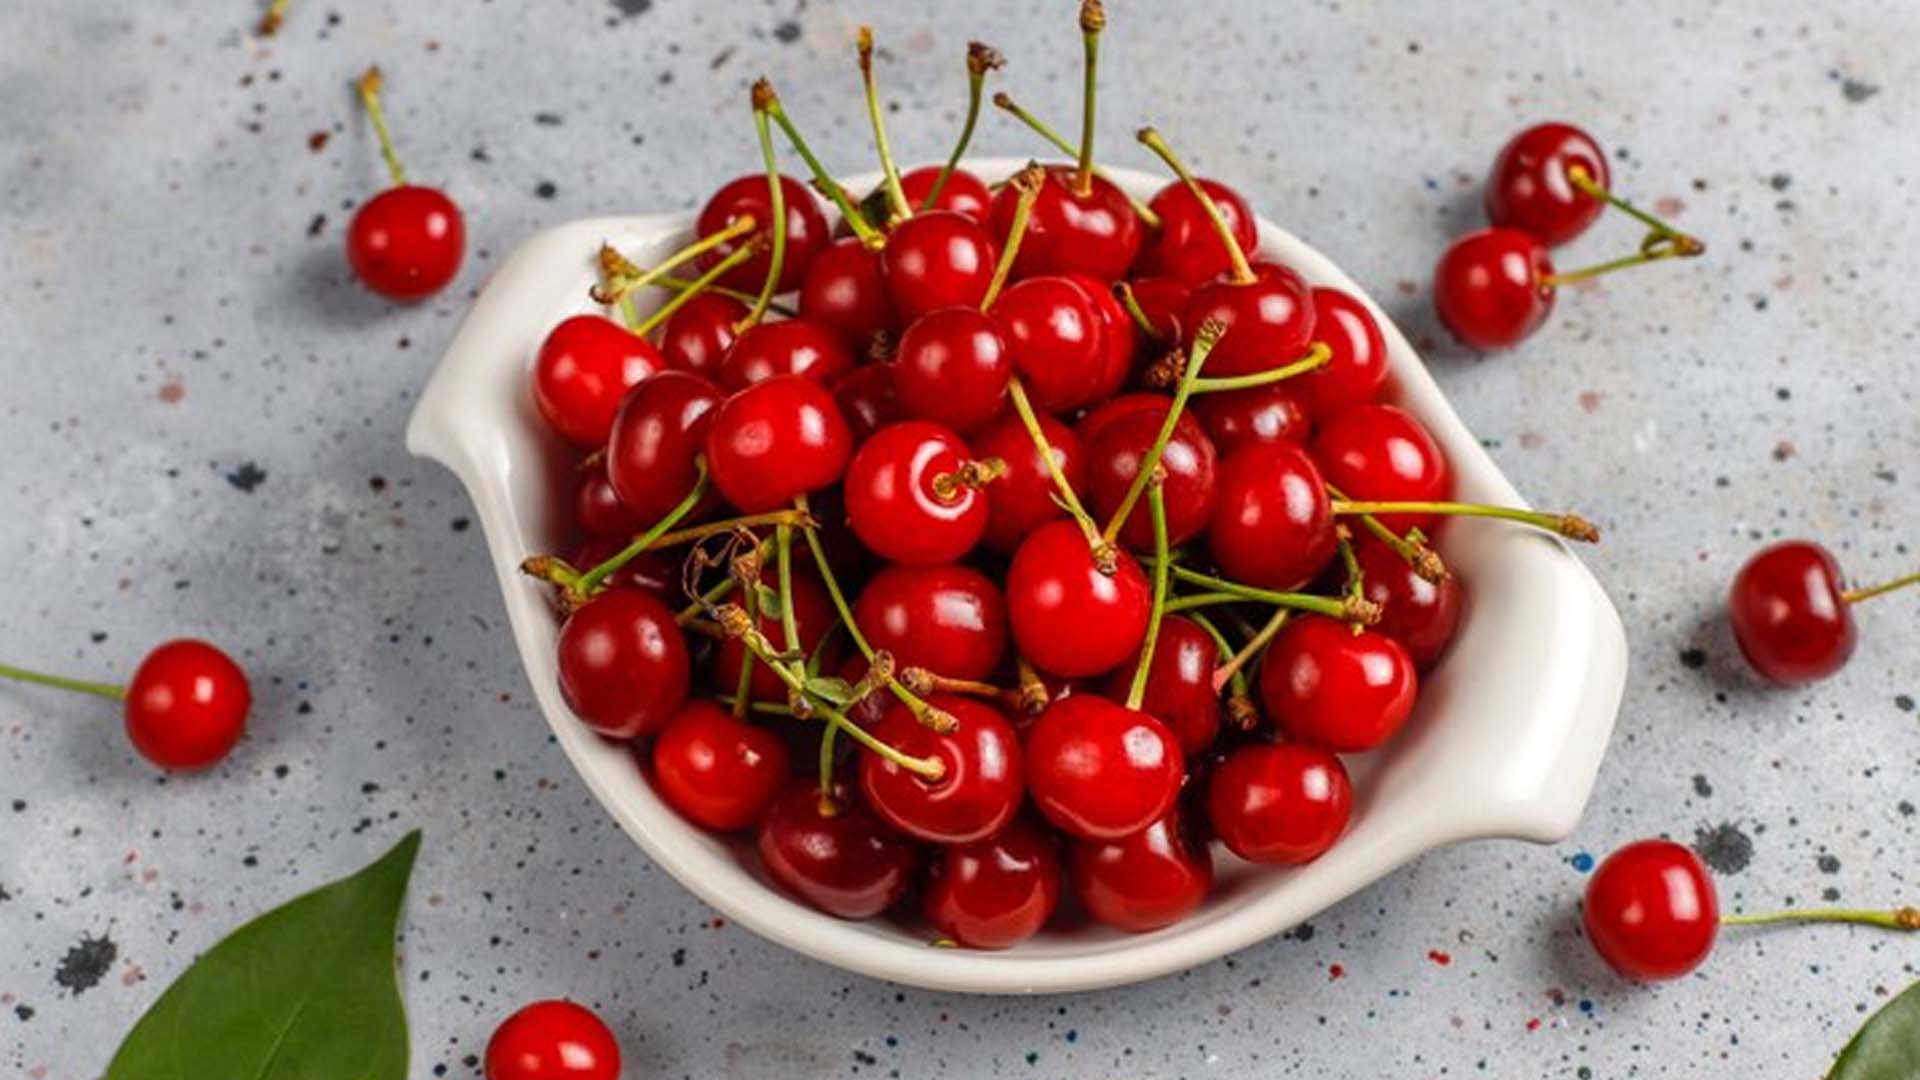 Nutritional Facts and Health Benefits of Cherries